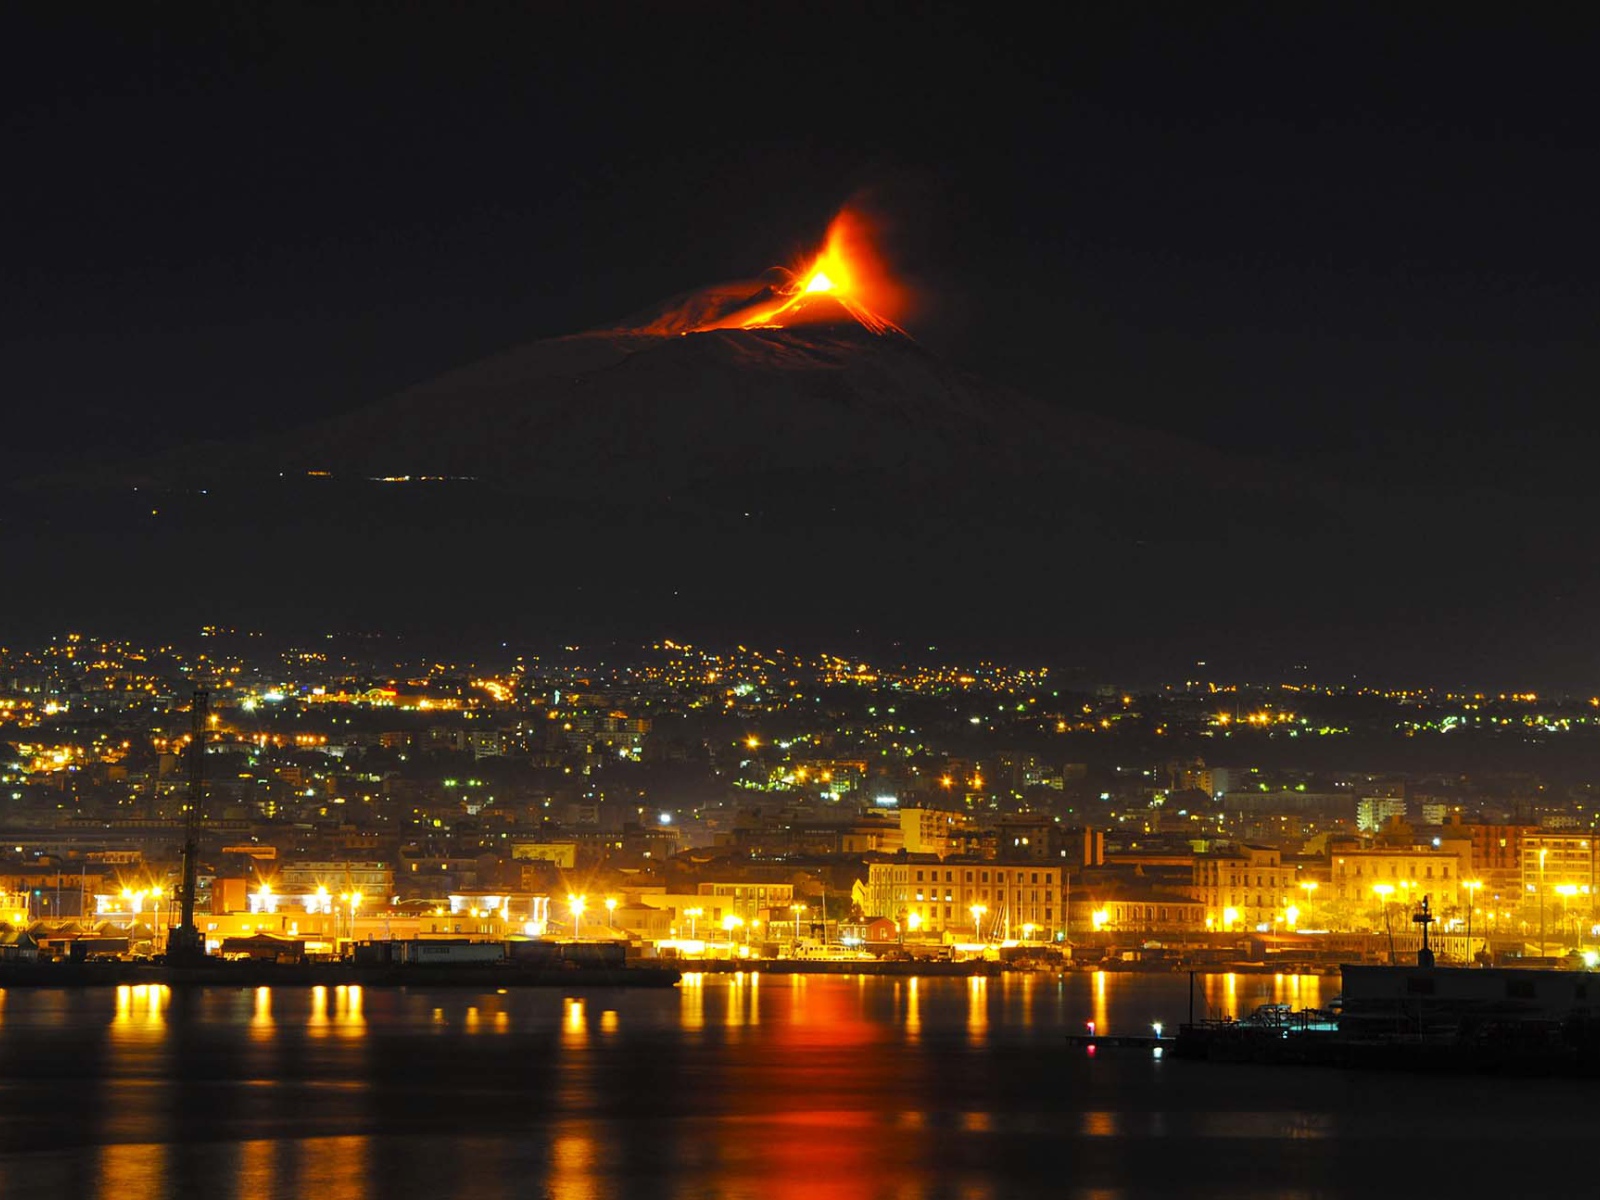 Awakening of the volcano Etna in the background of the night city